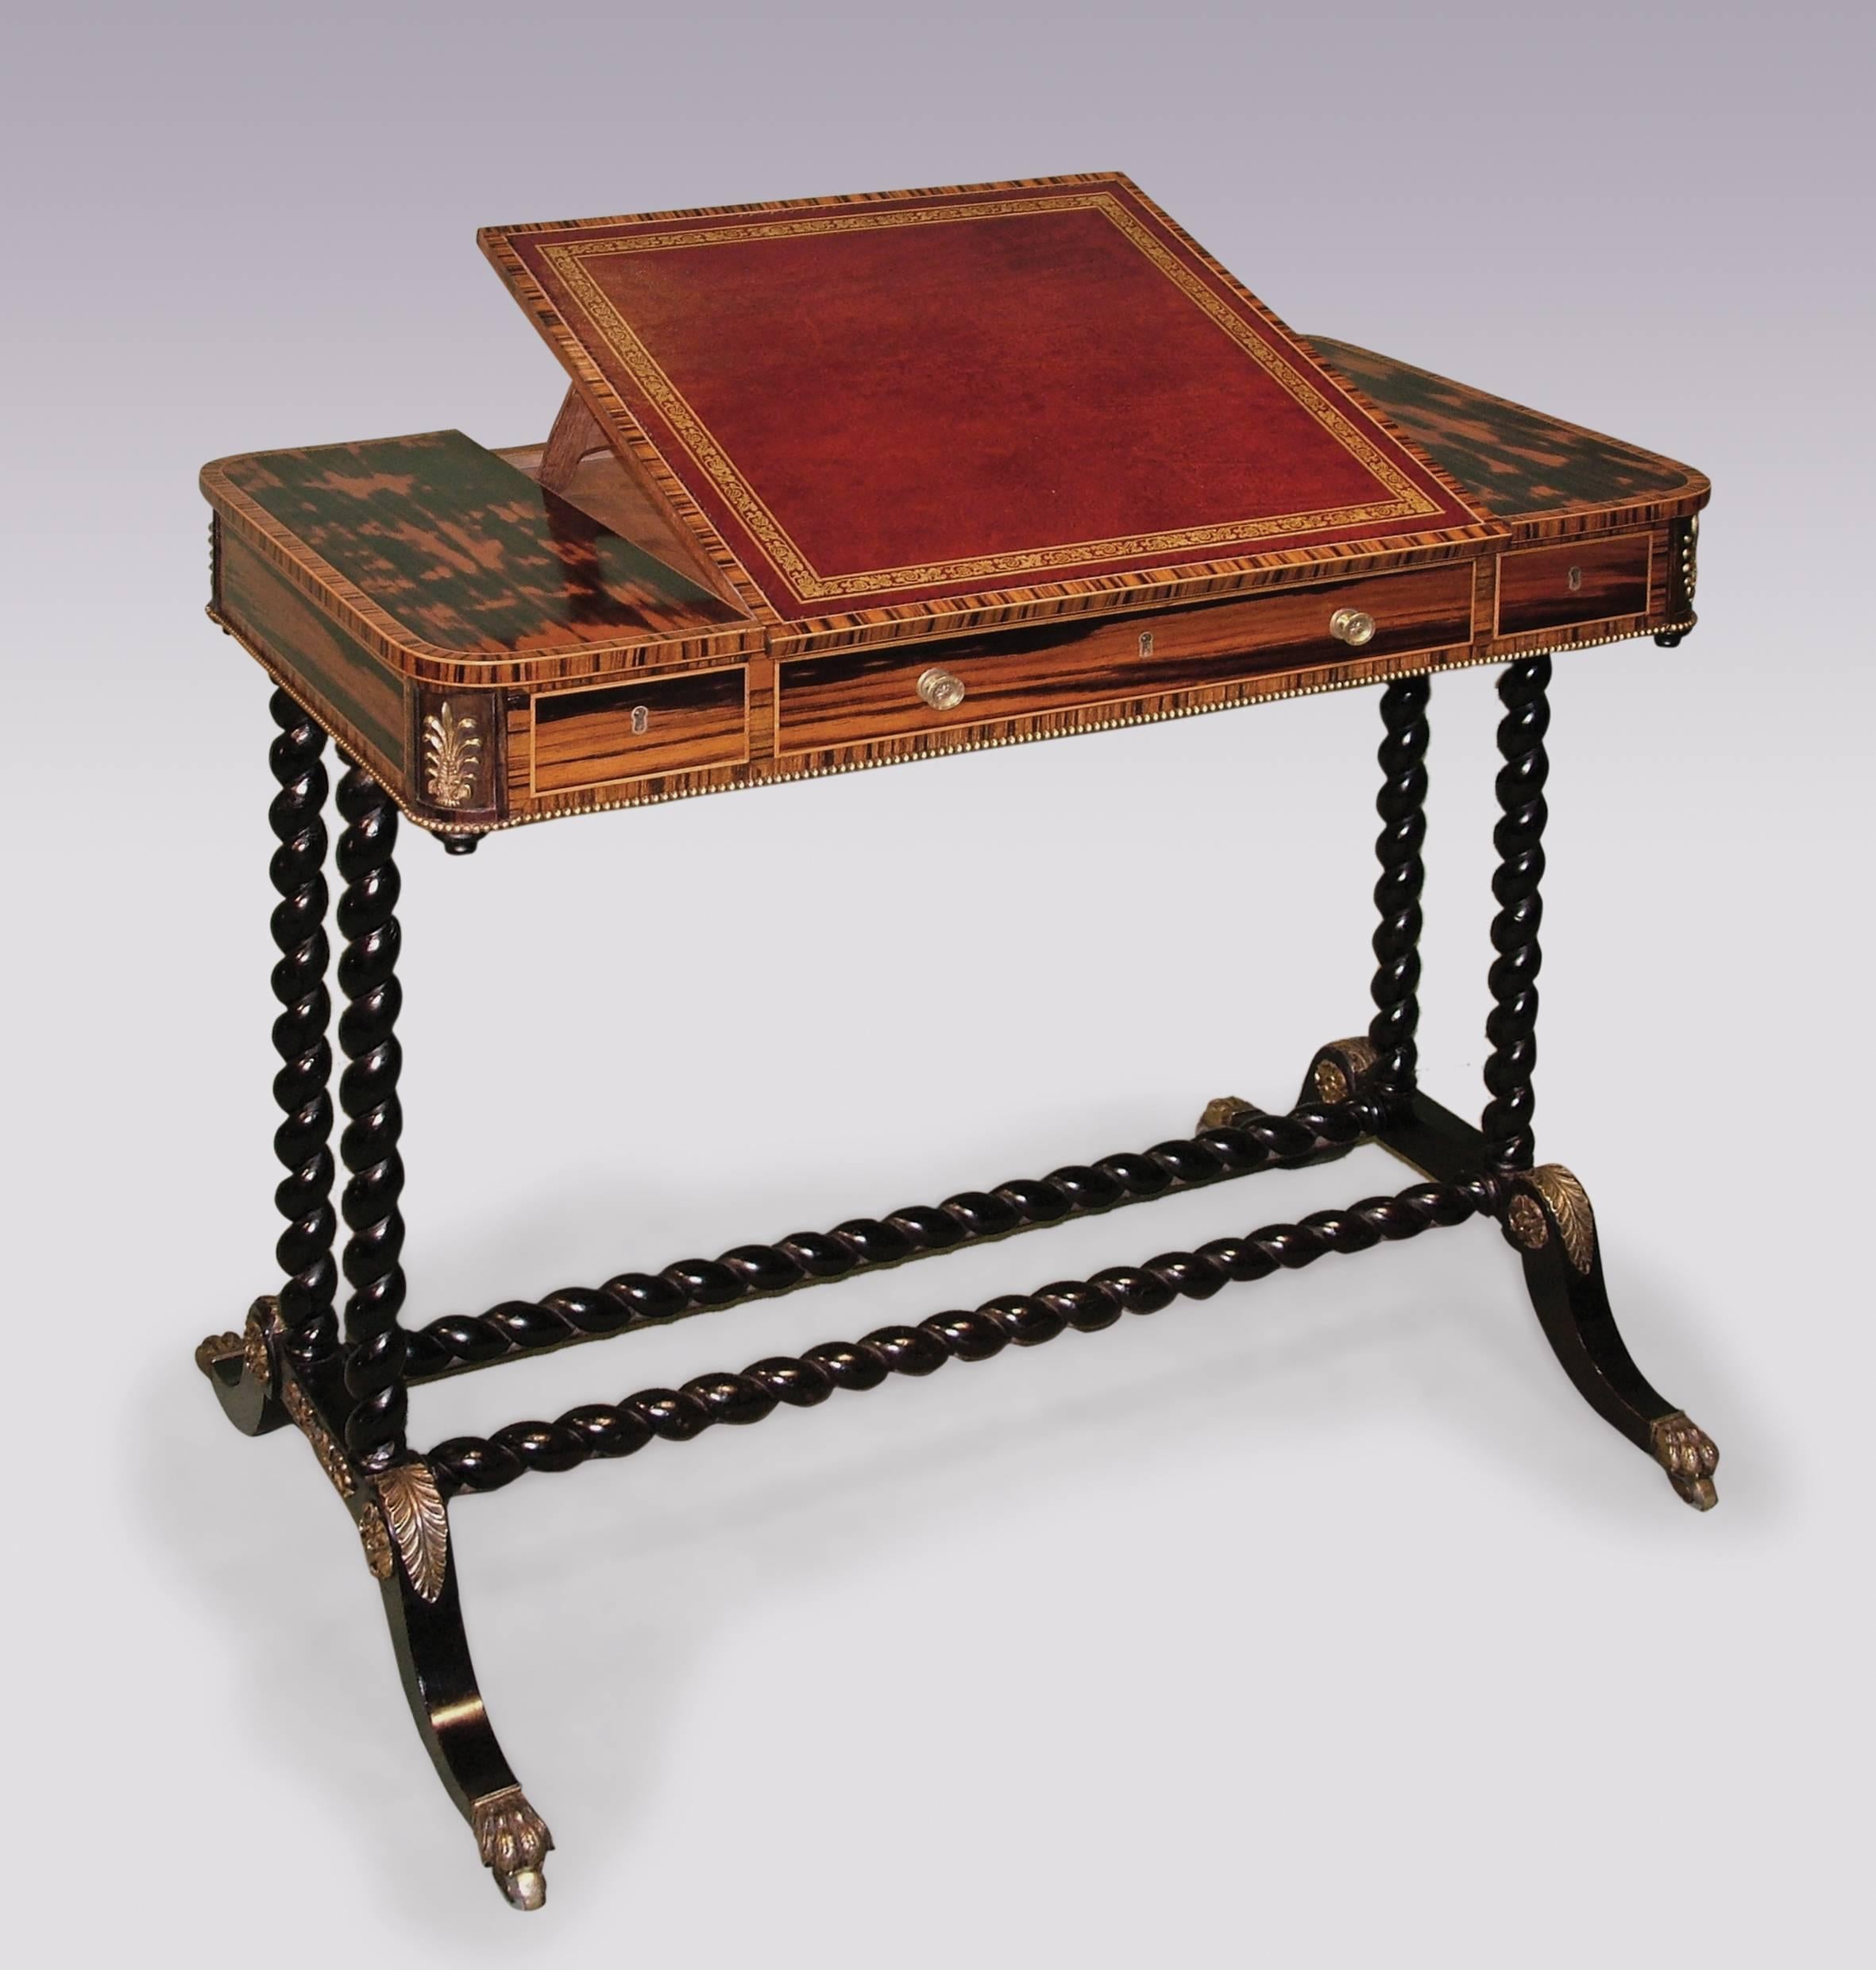 An unusual early 19th century Regency period Coromandel wood reading or writing table, boxwood strung throughout, having crossbanded top with central red gilt tooled leather lift up writing surface above beaded frieze with three drawers and applied